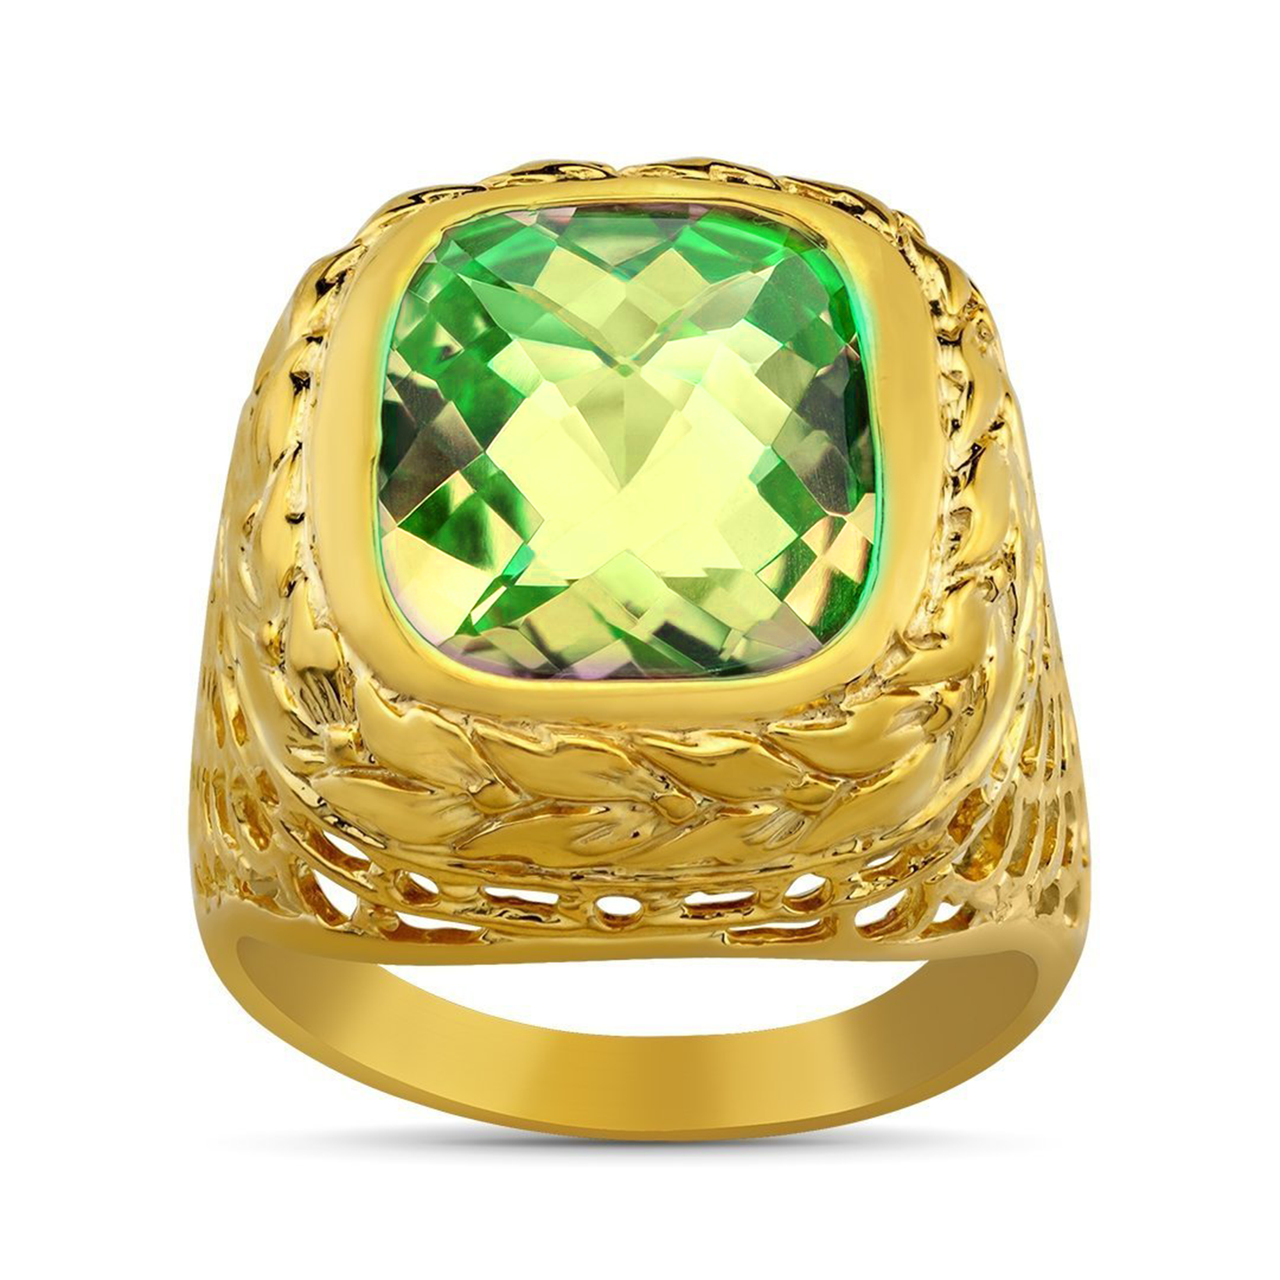 The Linnet Fancy Gold Ring For Men (Emerald) 916 – Welcome to Rani Alankar